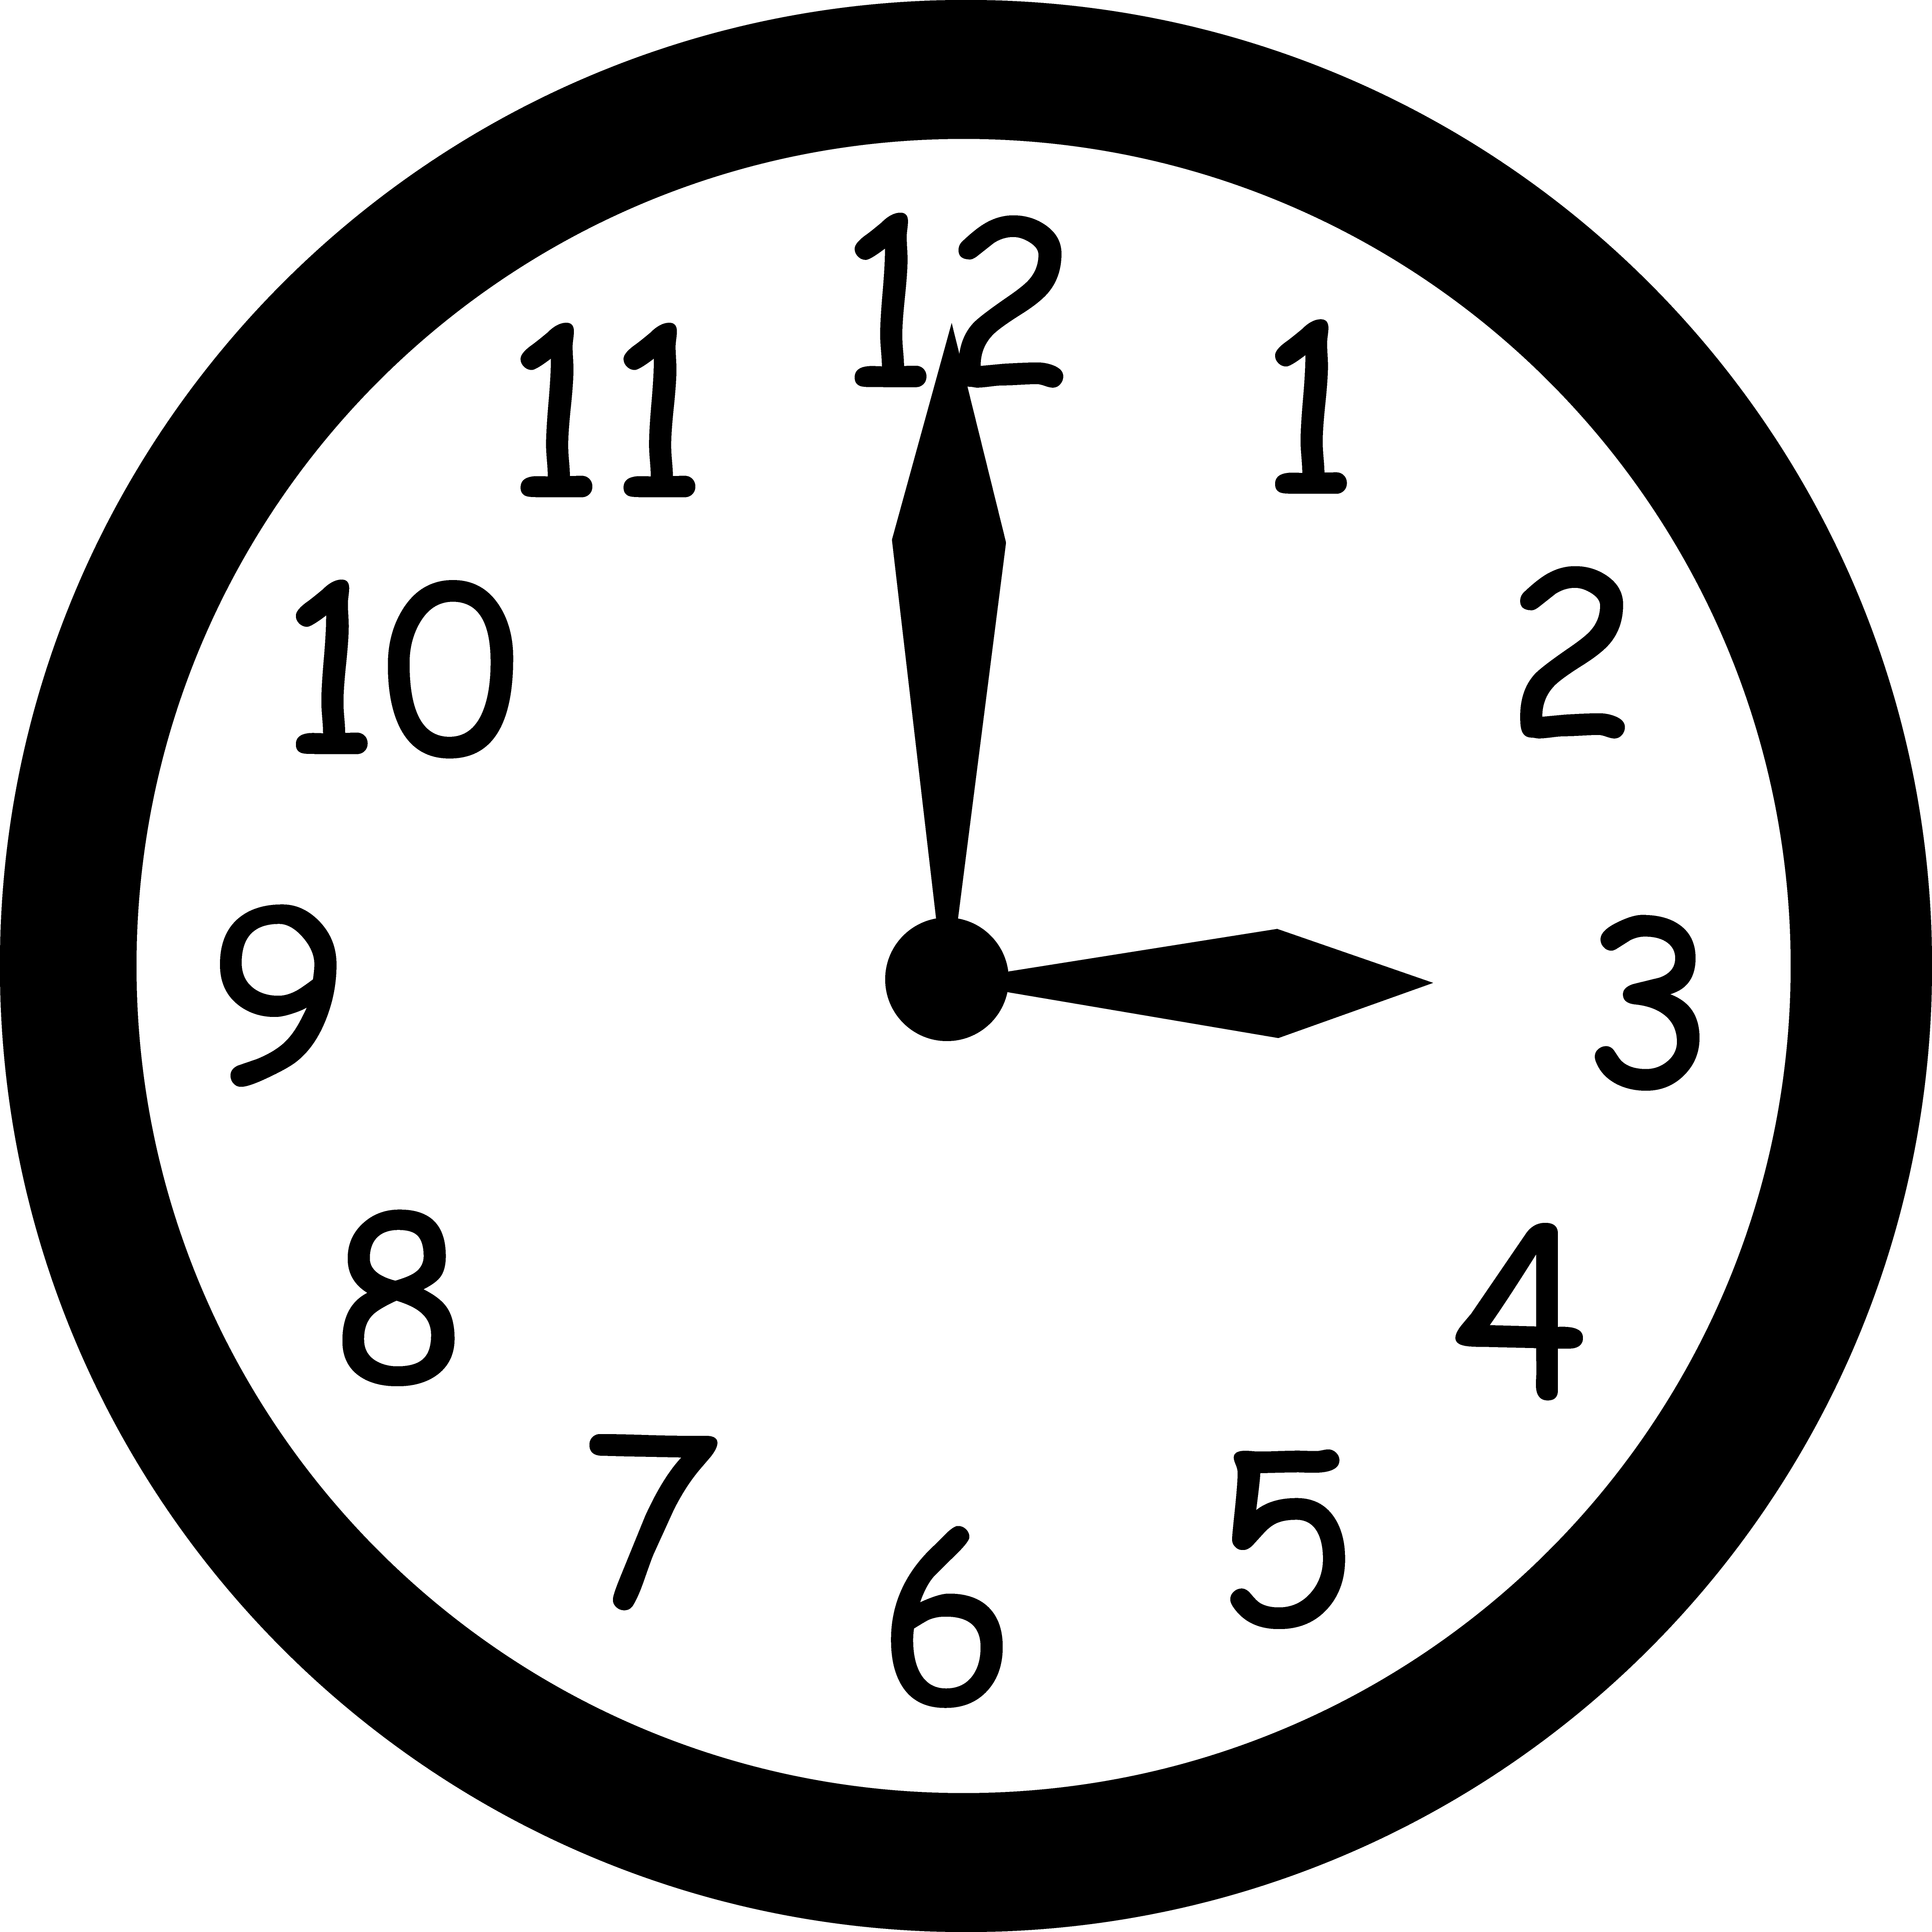 Analog Clock Clipart   Clipart Panda   Free Clipart Images